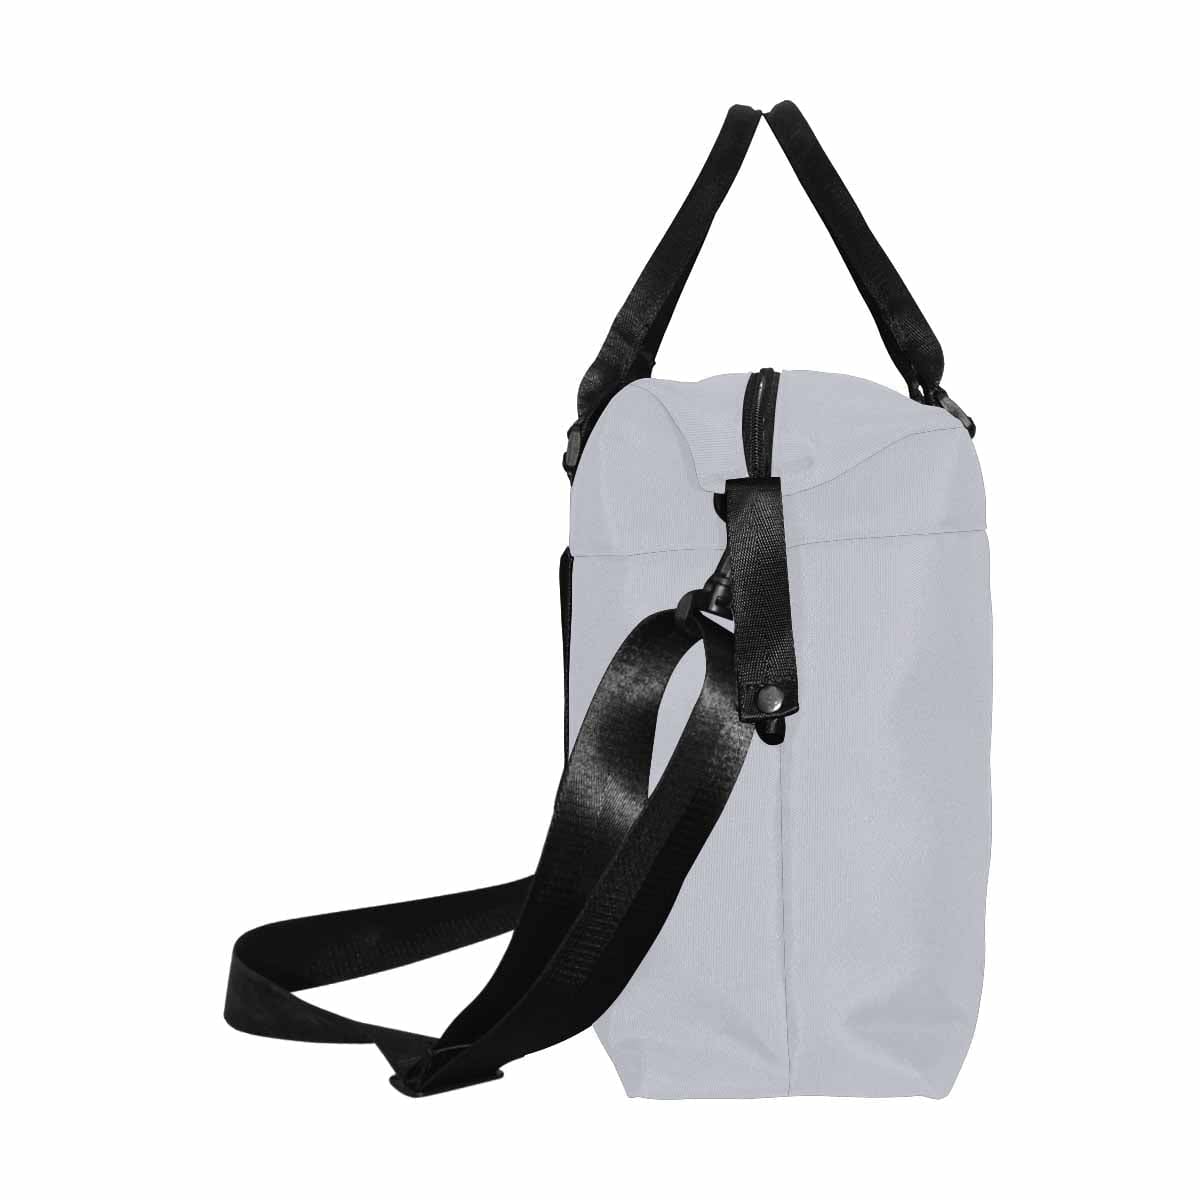 Travel Bag Slate Gray Canvas Carry On - Bags | Travel Bags | Canvas Carry